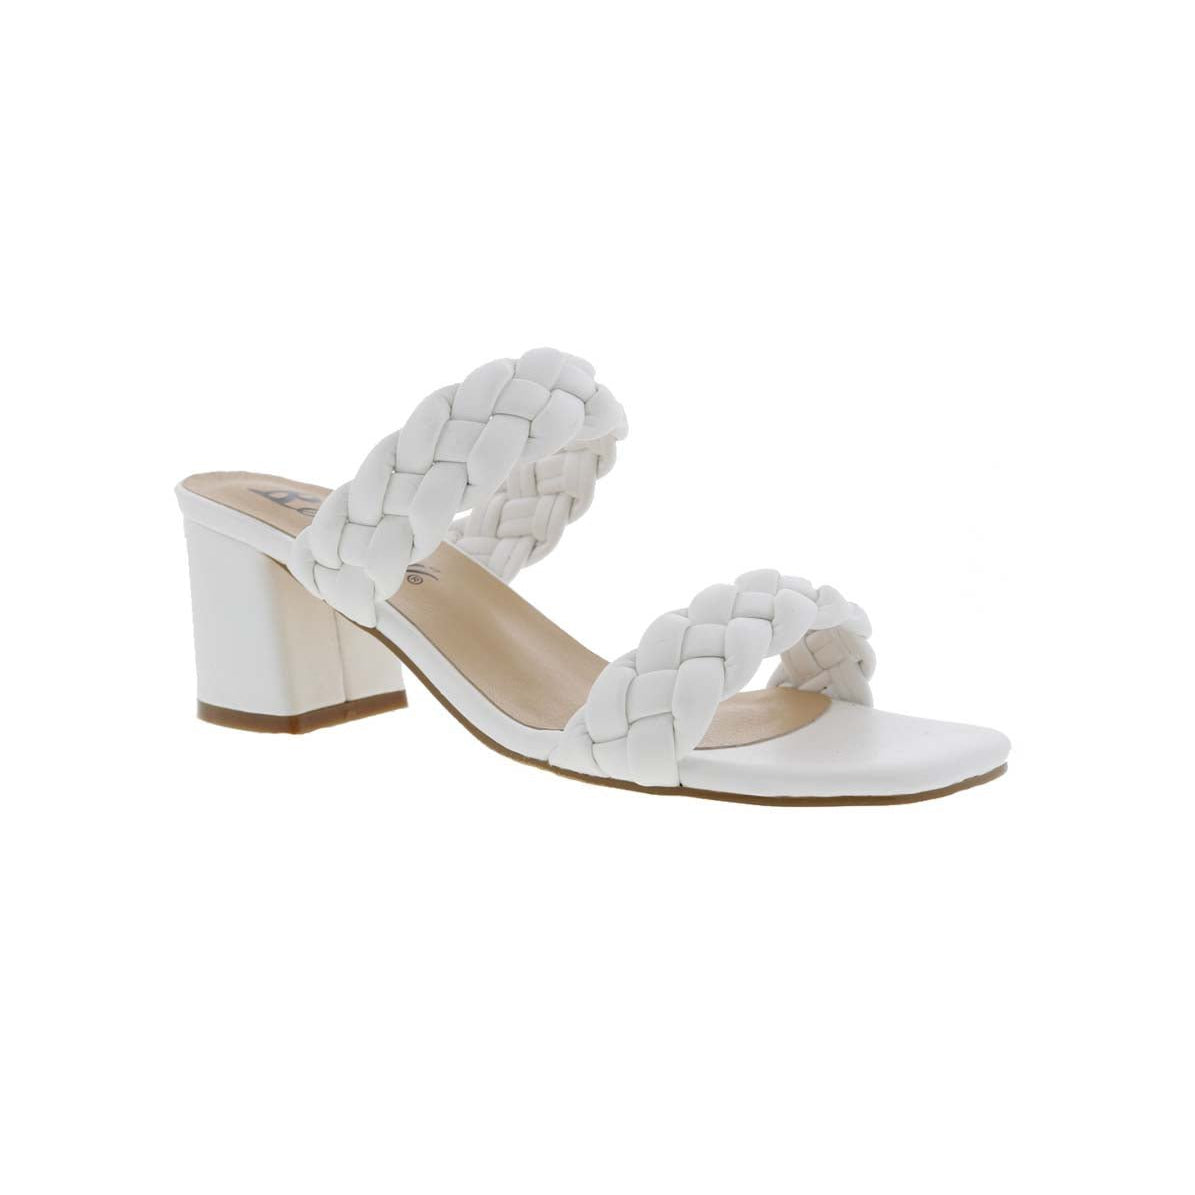 BELLINI FUSS WOMEN SLIDE SANDAL IN WHITE SMOOTH - TLW Shoes